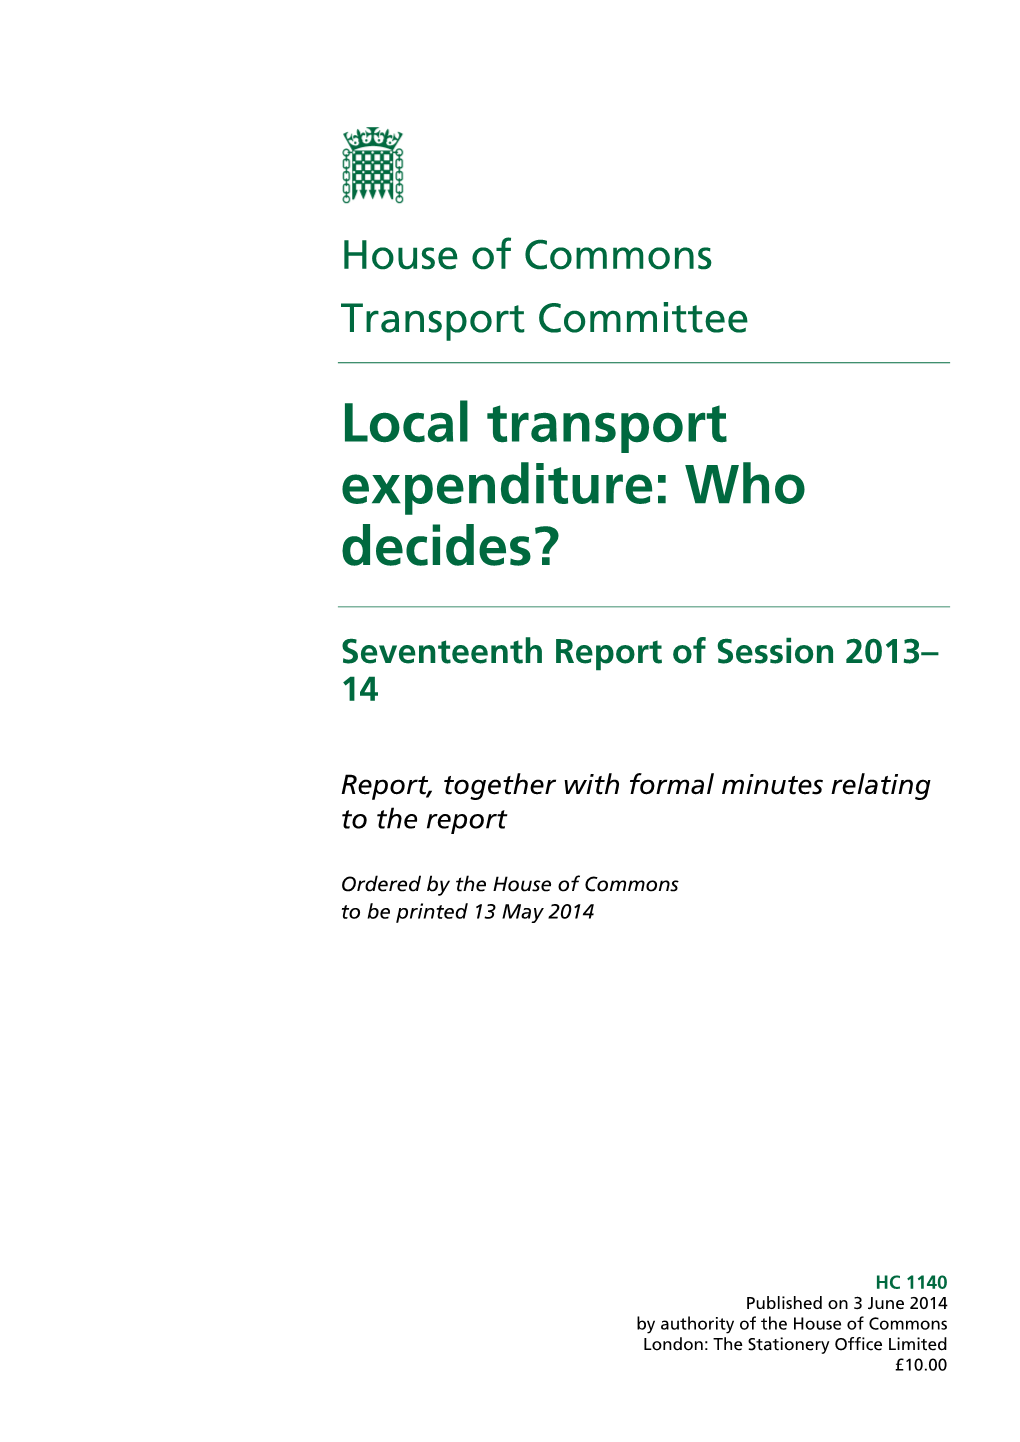 Local Transport Expenditure: Who Decides?